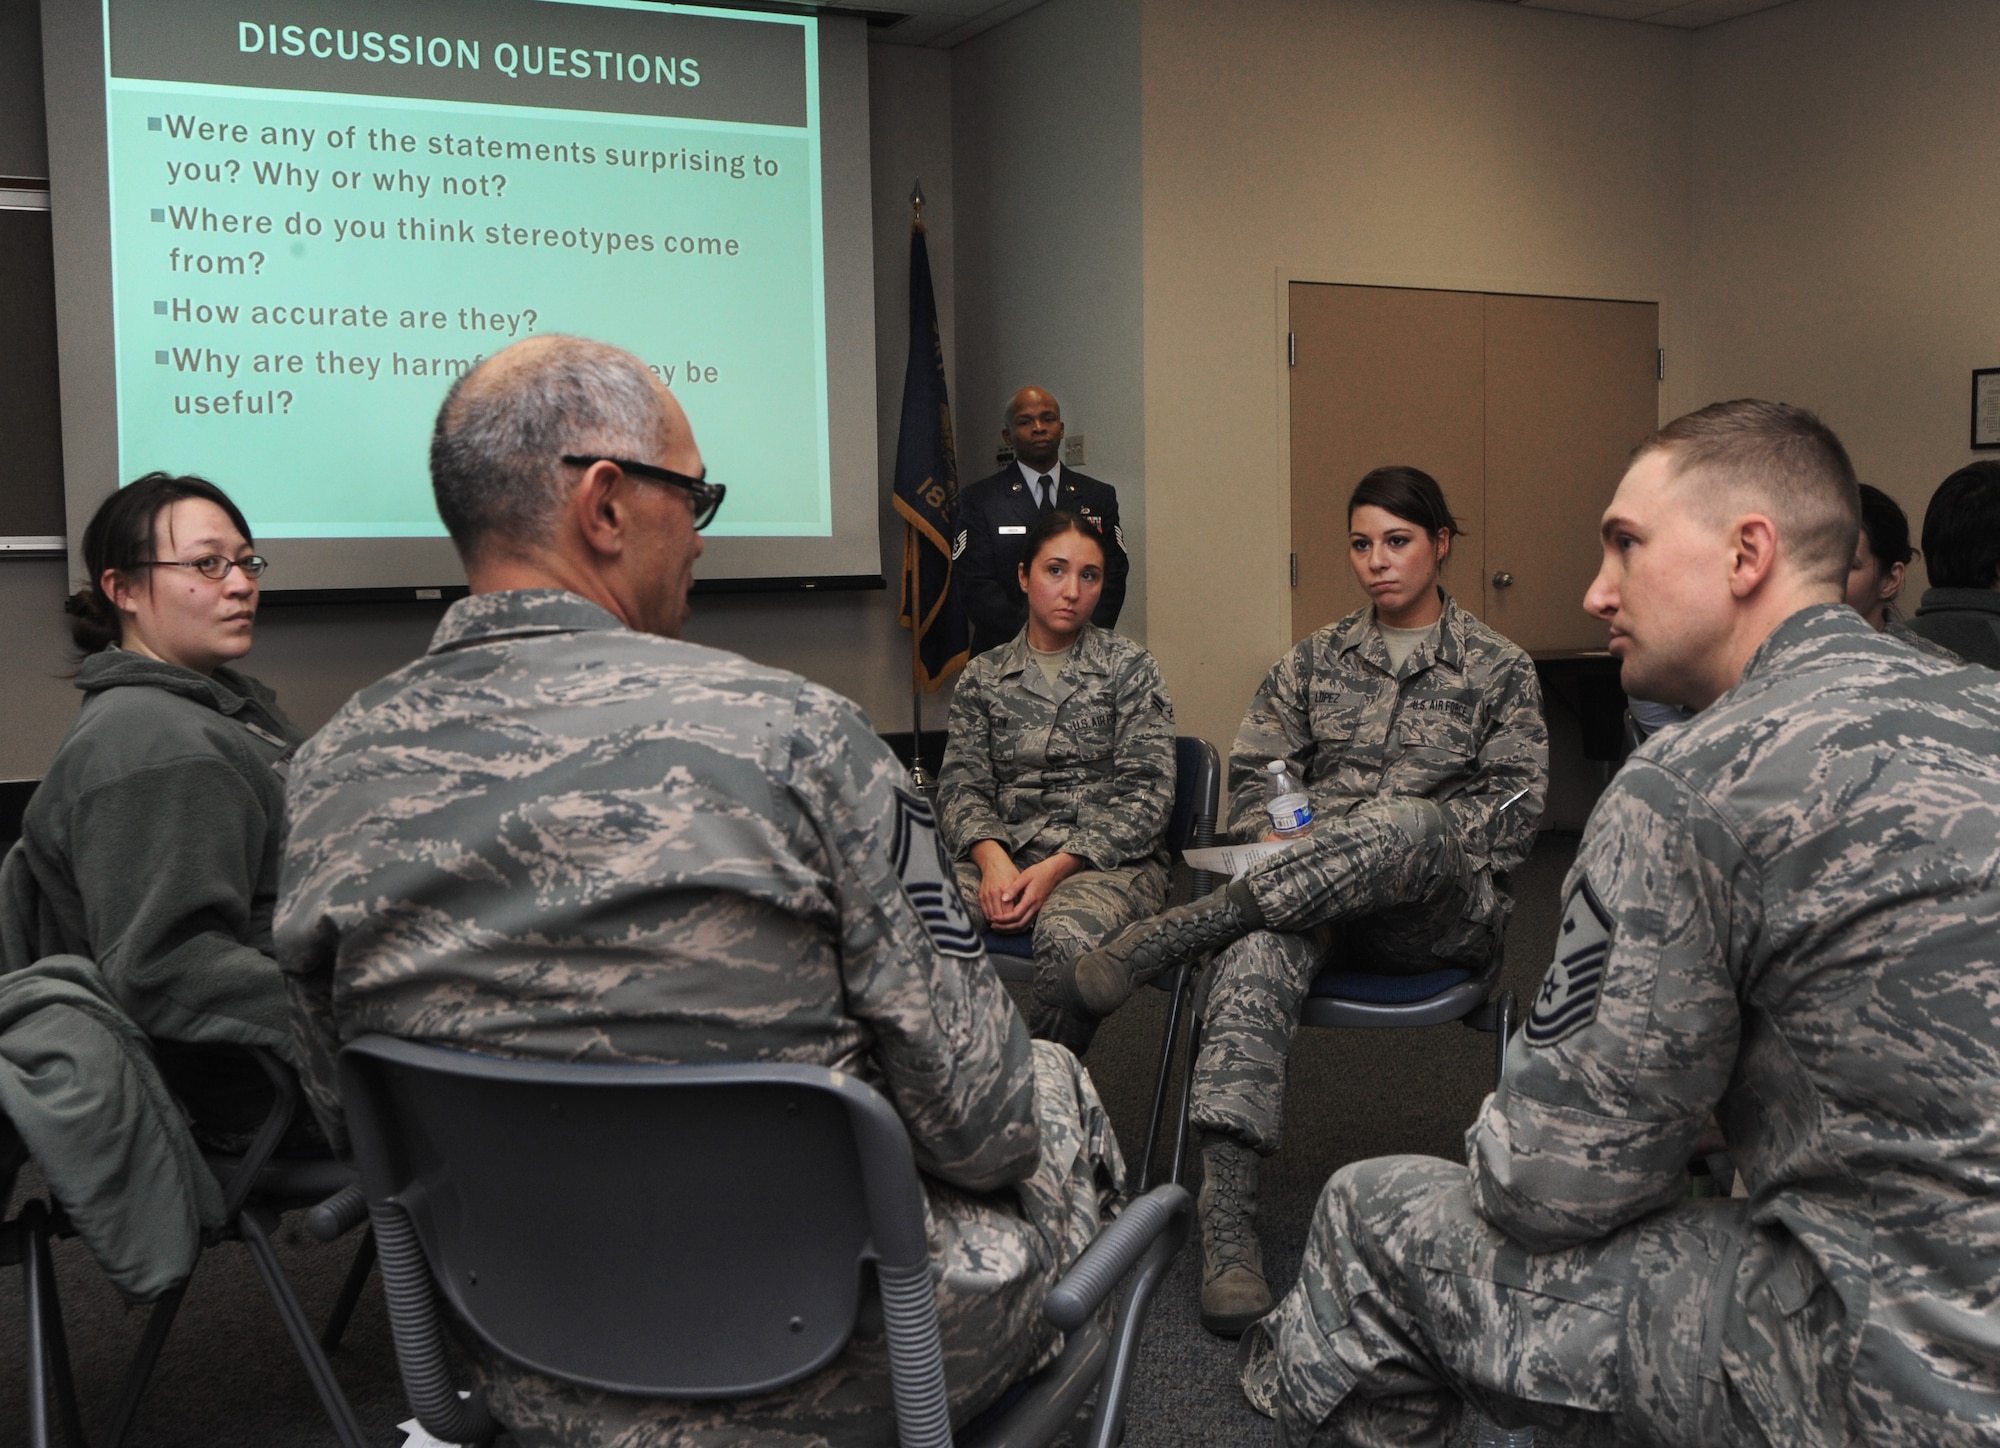 Members of the 142nd Fighter Wing participate in a group activity as part of the Diversity and Inclusion Counsel’s monthly meeting during the Unit Training Assembly, Dec. 07, 2014, Portland Air National Guard Base, Ore. The Diversity and Inclusion Counsel helps foster communication by recognizing that a diverse set of experiences, perspectives, and backgrounds are crucial to mission success. (U.S. Air National Guard photo by Tech. Sgt. John Hughel, 142nd Fighter Wing Public Affairs/Released)